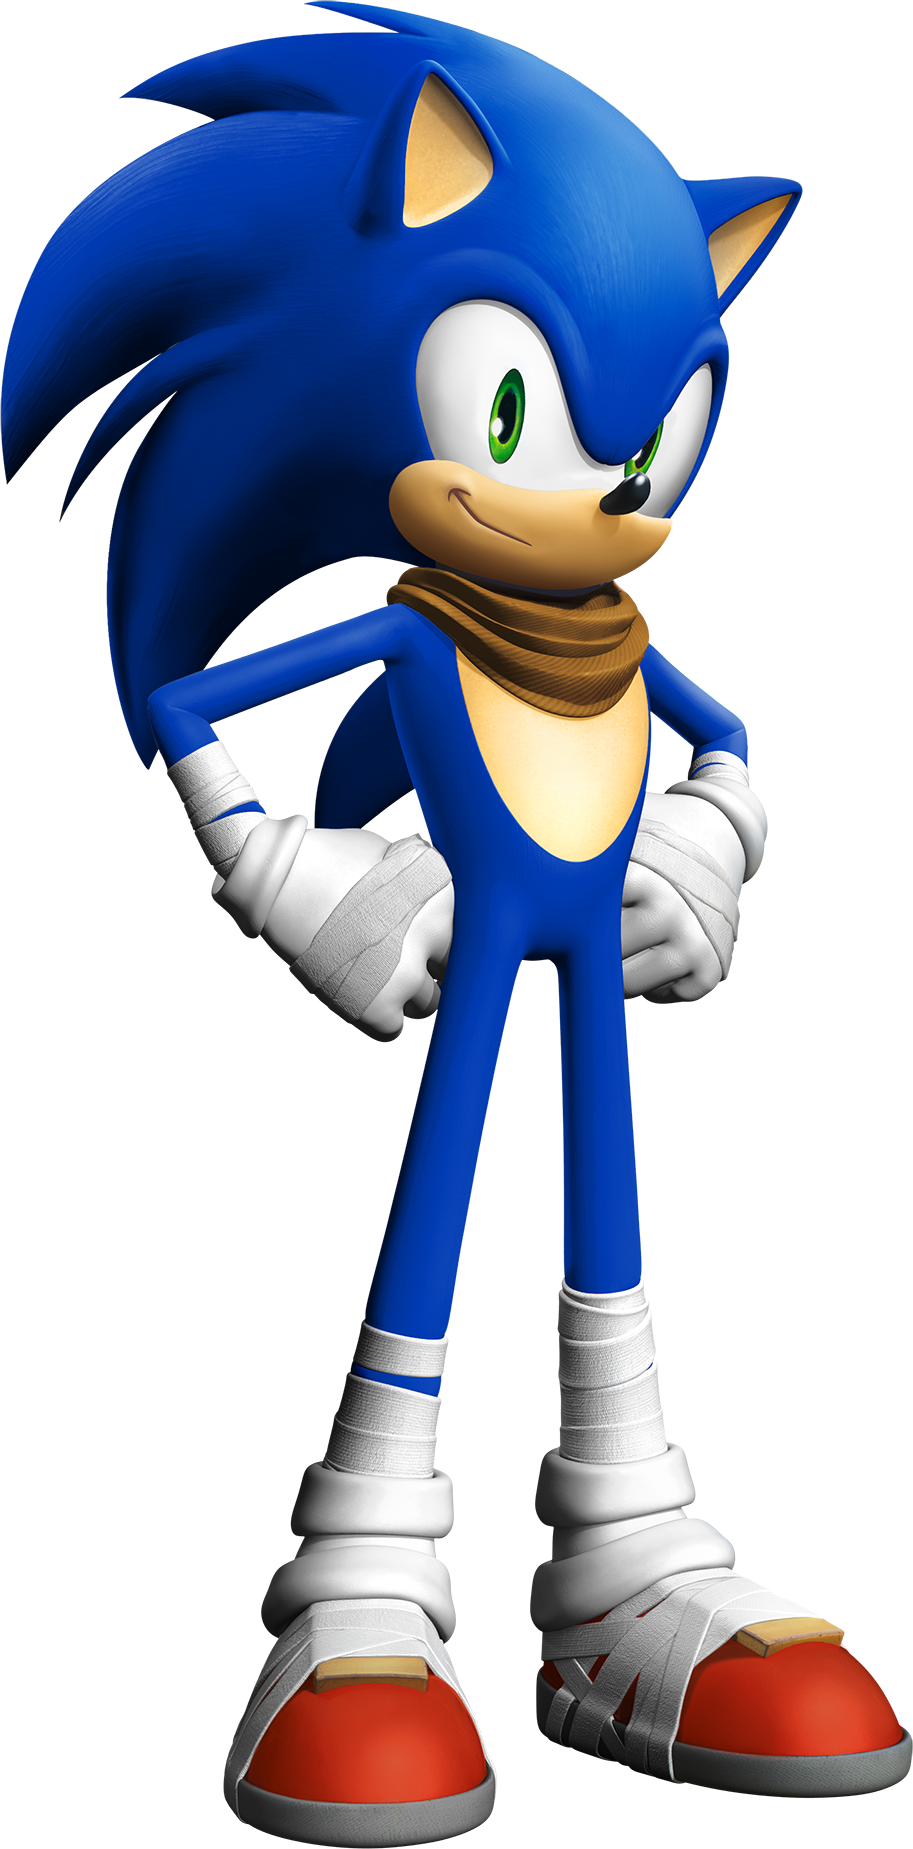 https://static.wikia.nocookie.net/sonic/images/0/04/Sonic_the_Hedgehog_Sonic_Boom.png/revision/latest?cb=20140213174937